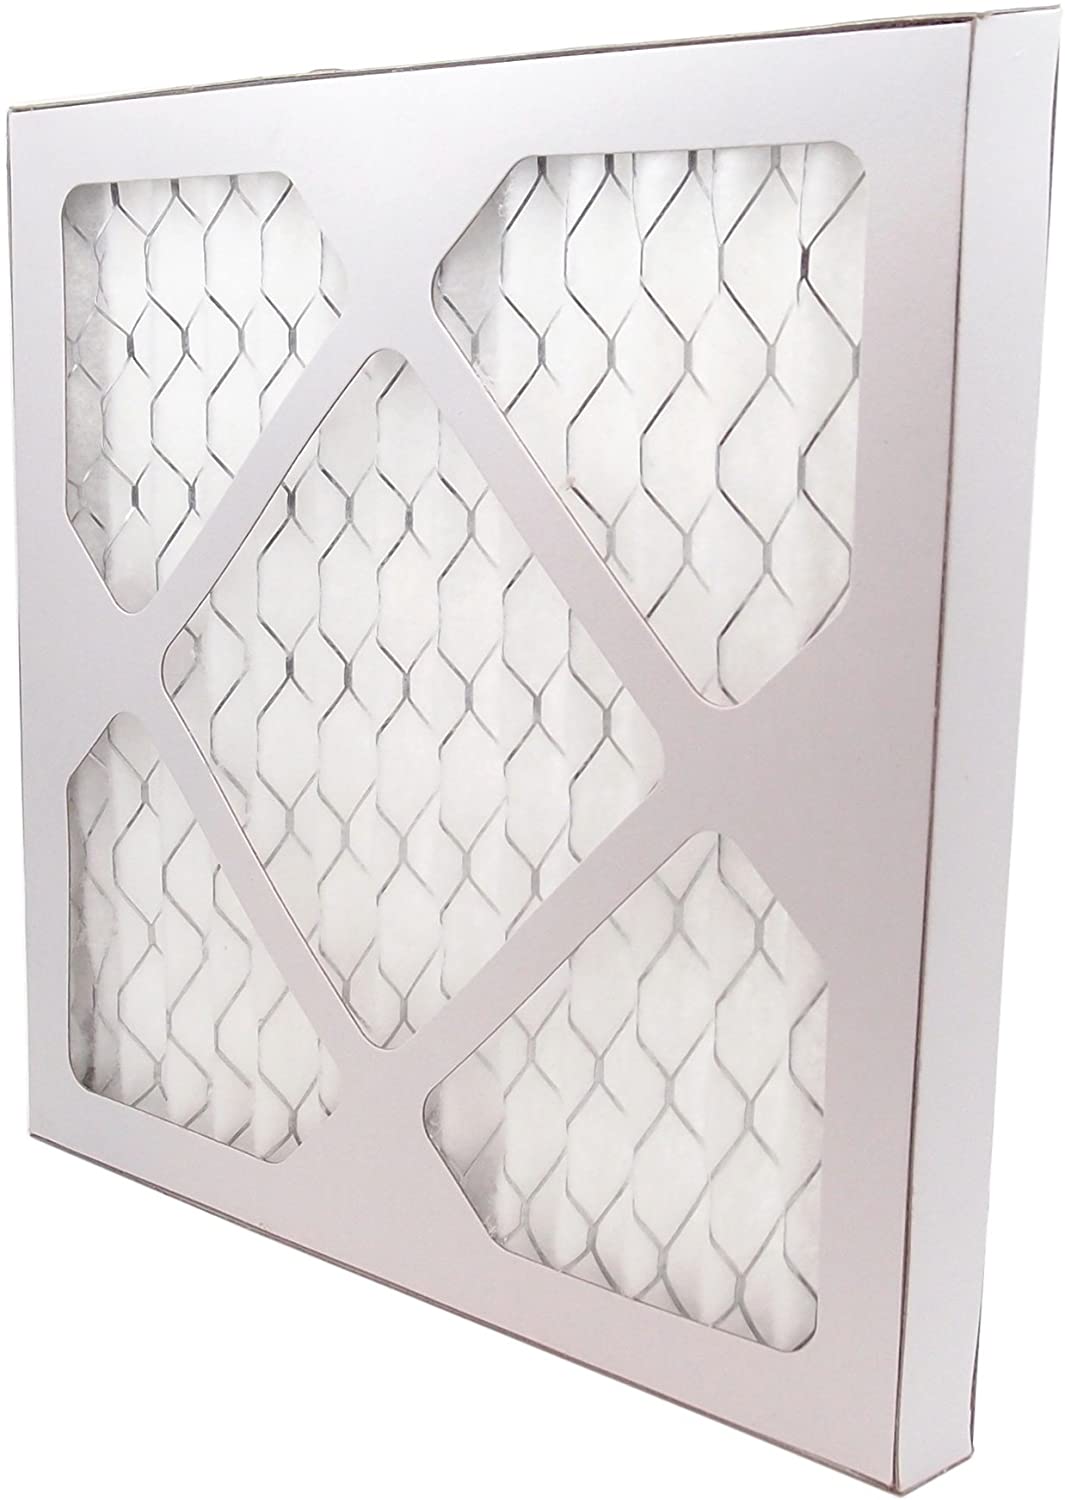 24&quot; x 10&quot; Pleated MERV 8 Filter for HVAC Return Filter Grille [Actual Dimensions: 23.75 X 9.75] 3-Pack